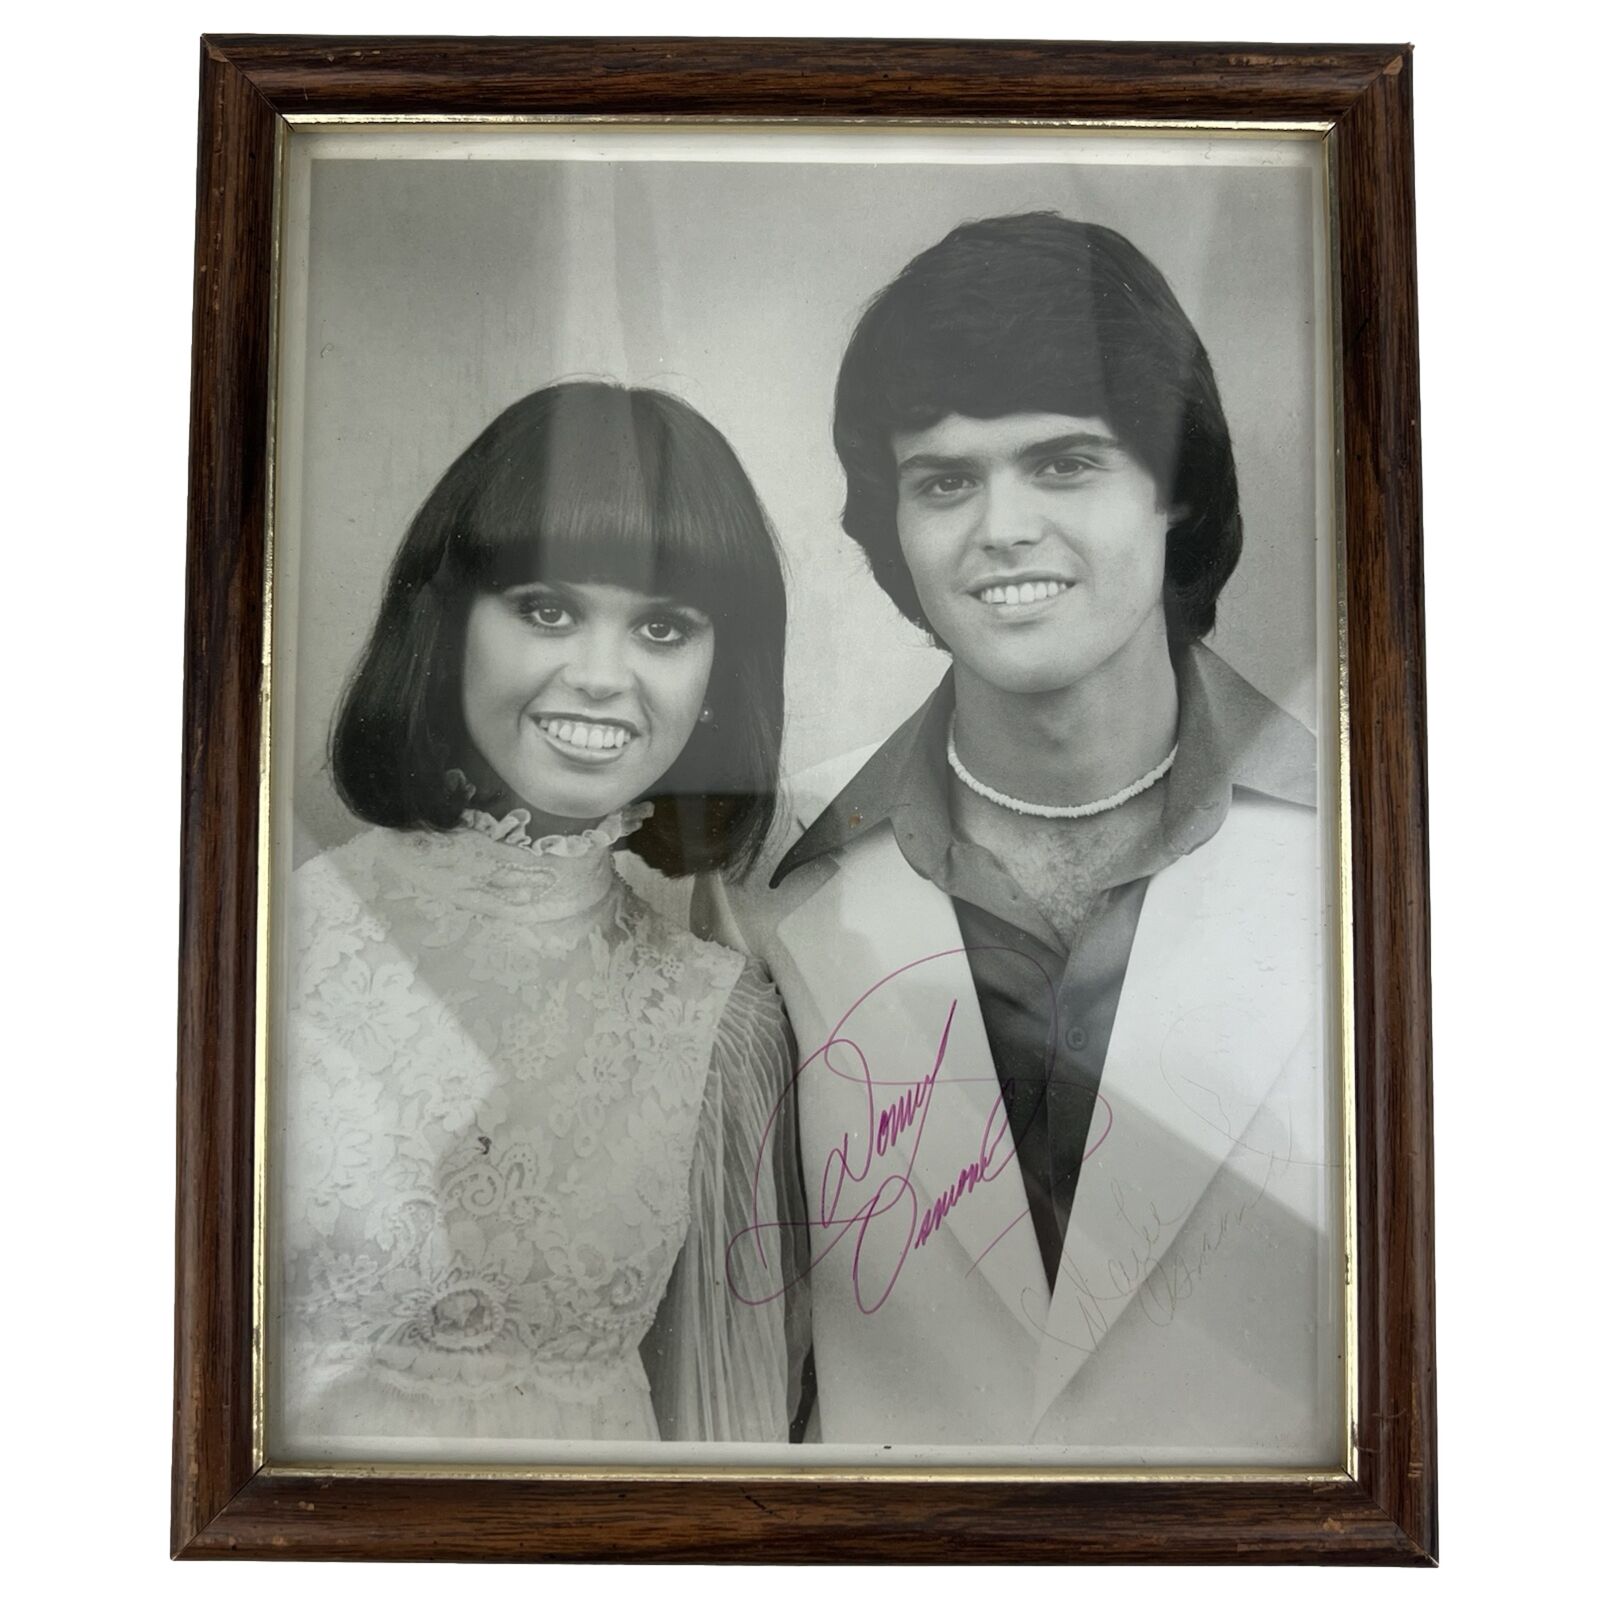 VNTG RARE Autographed Picture of Donny and Marie Osmond 11x9 Hand Signed